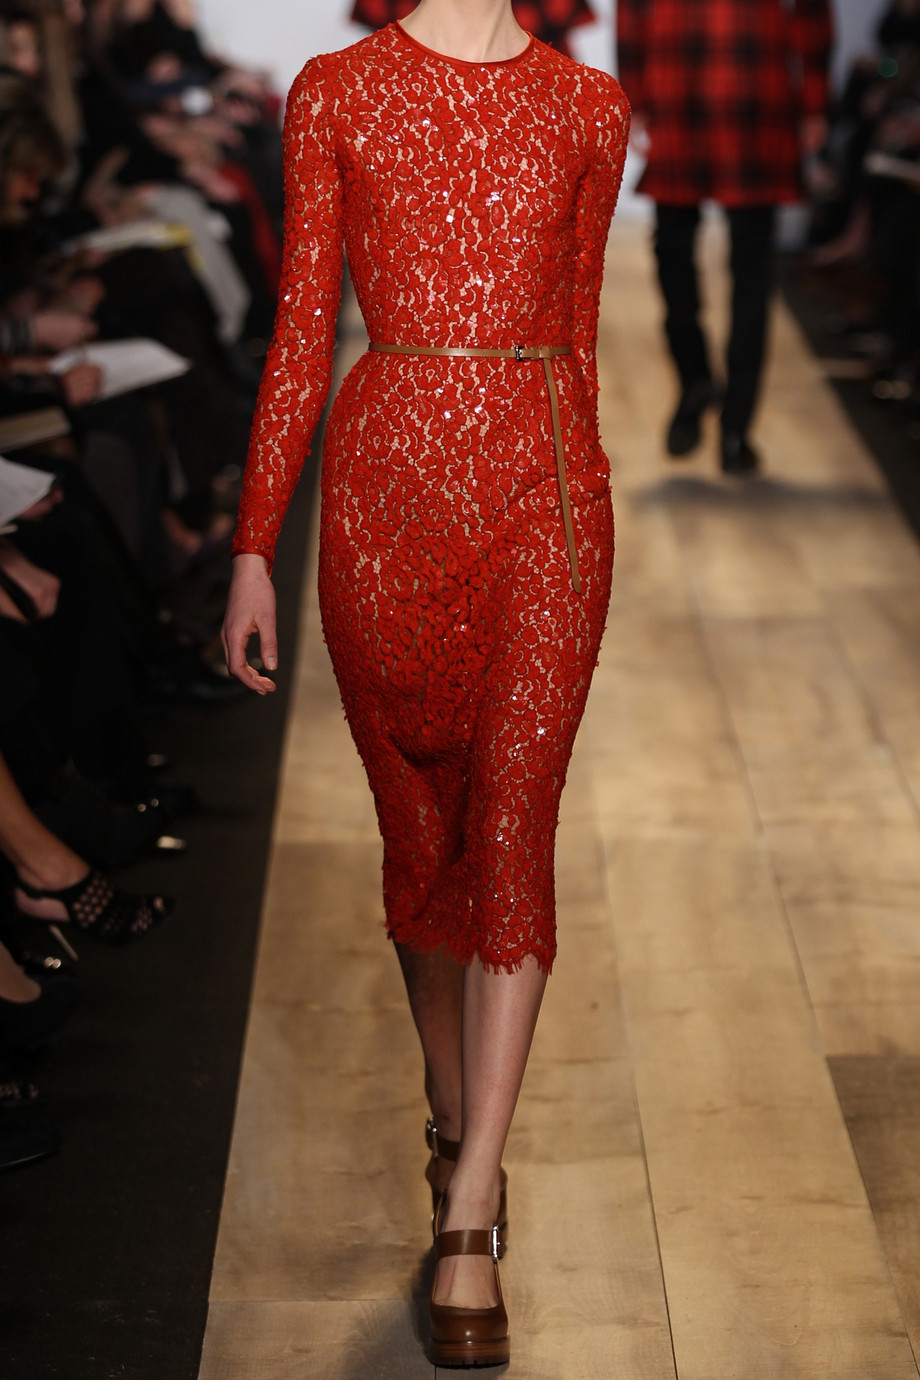 Lyst - Michael kors Sequined Lace Dress in Red